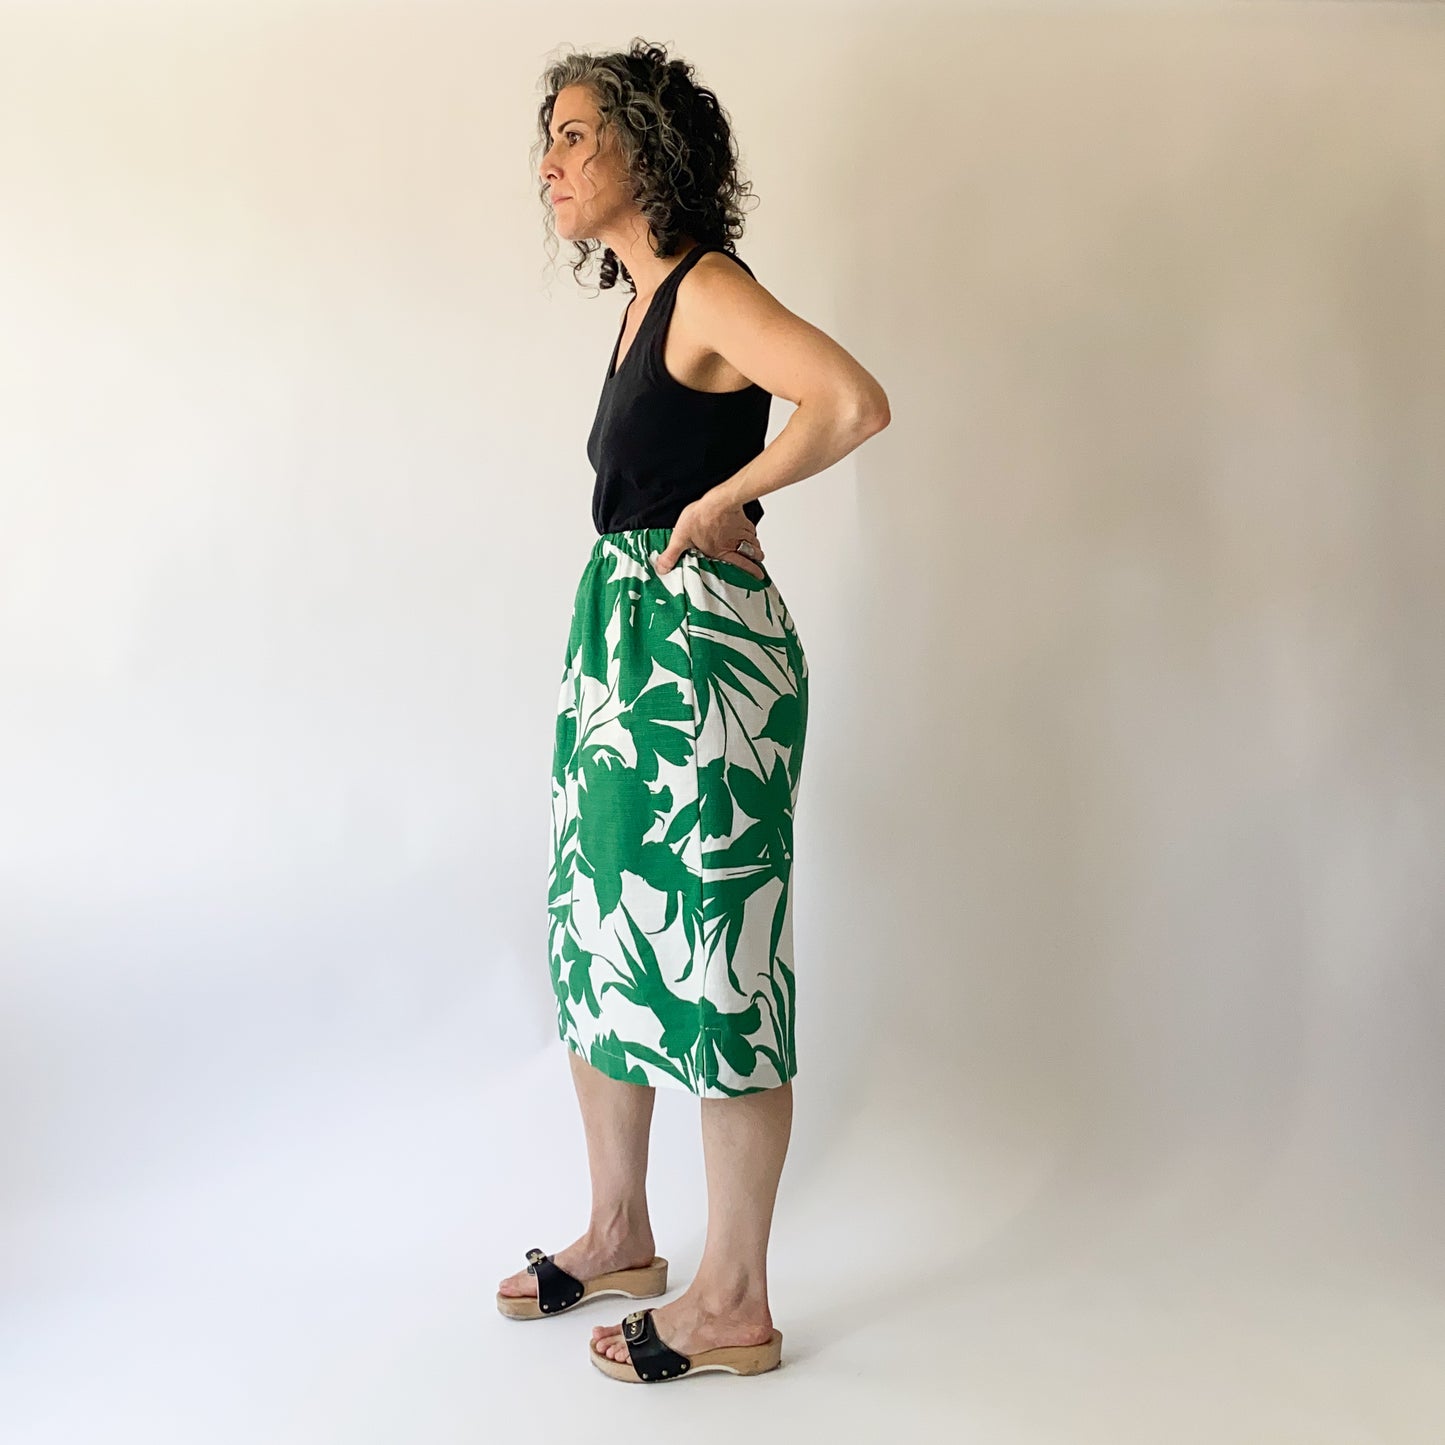 Alison Skirt - Green and White Floral